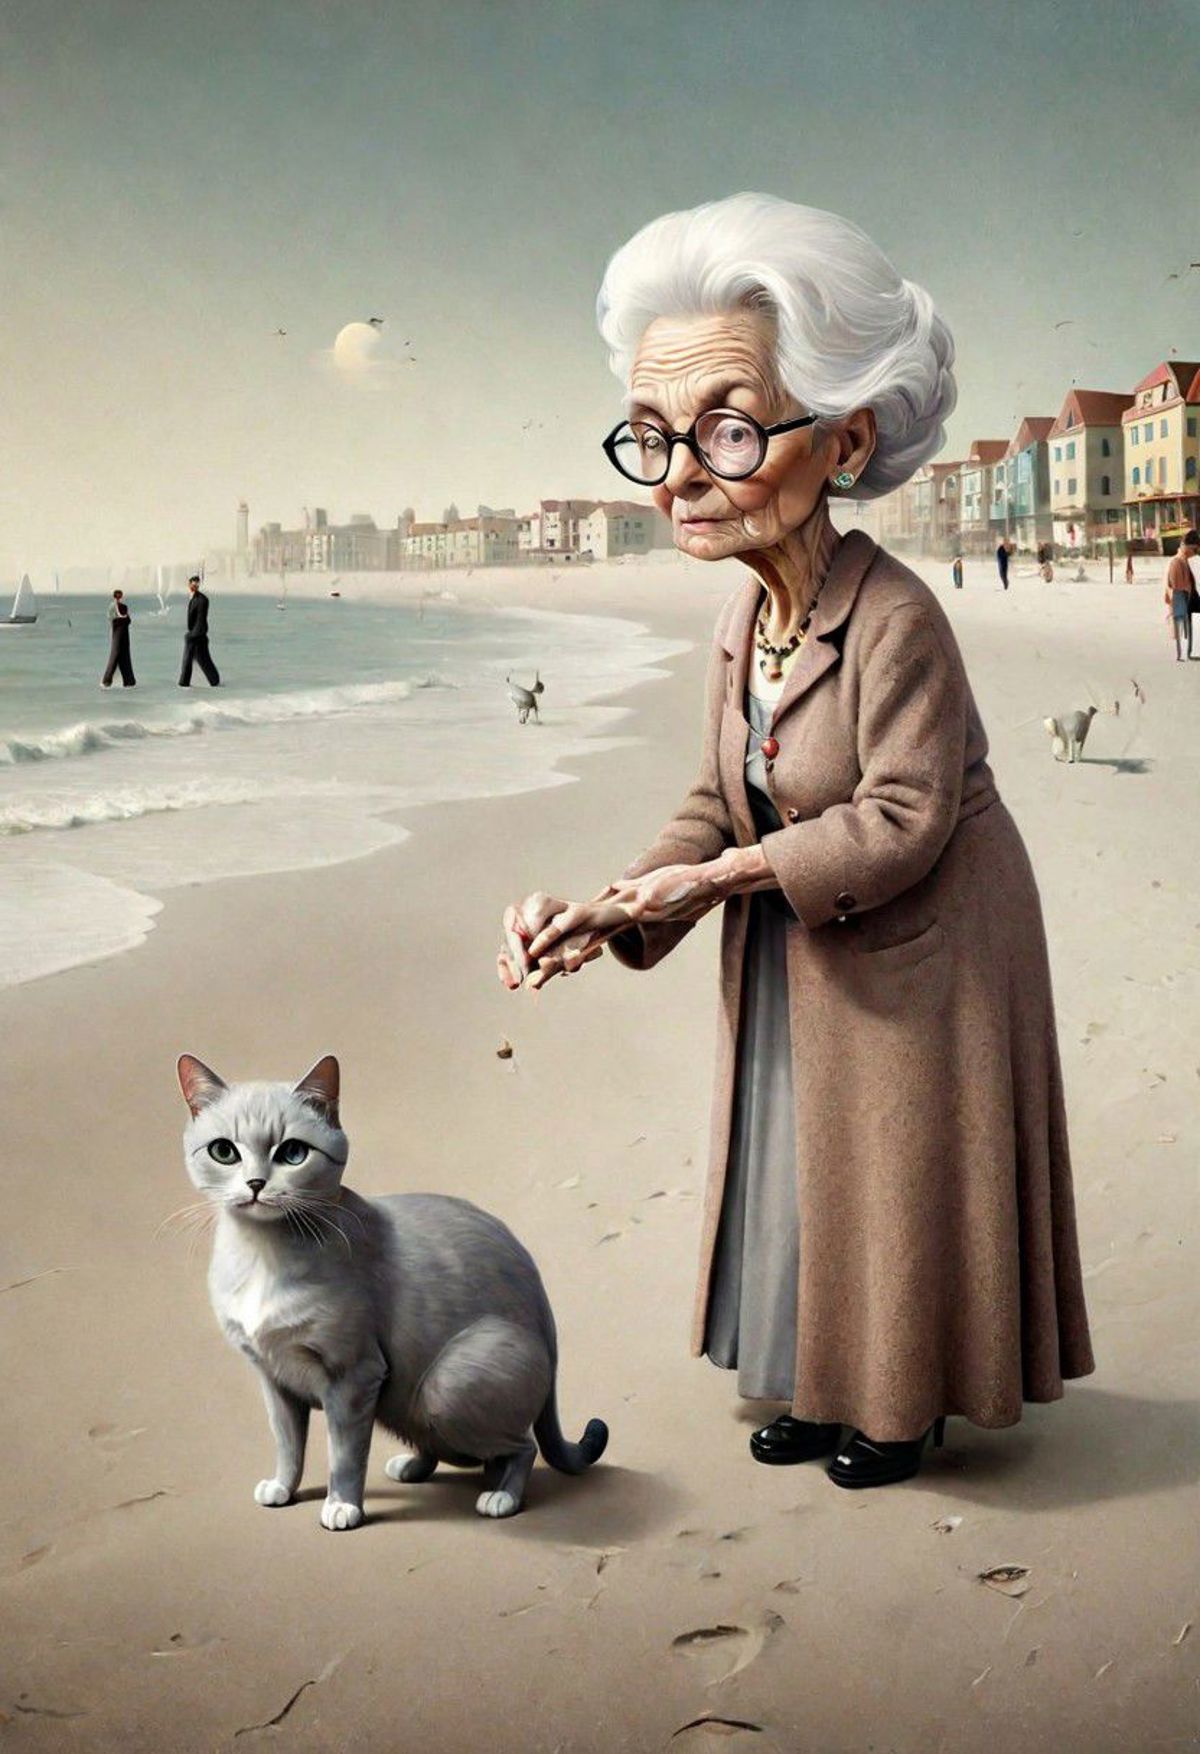 An elderly woman with glasses and a cat on a beach.